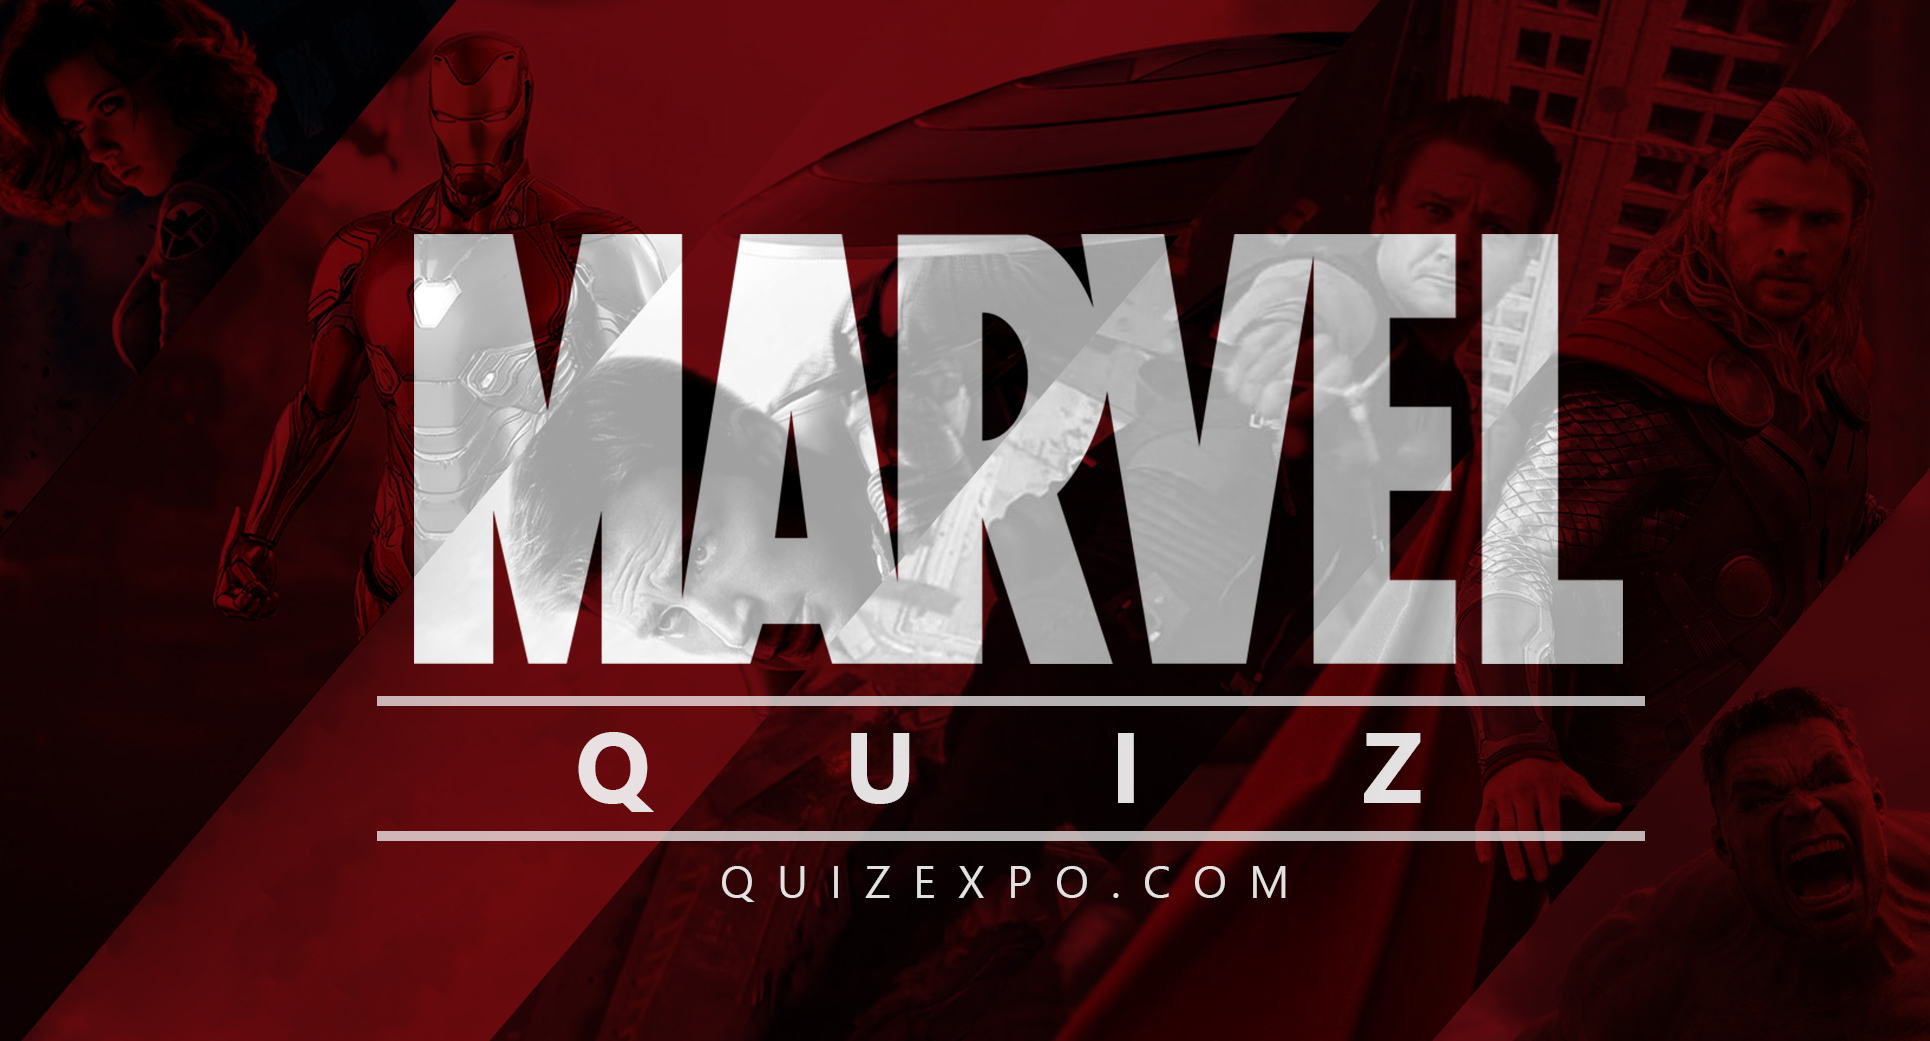 Amazing marvel quiz. Just real fans can get more than 80%